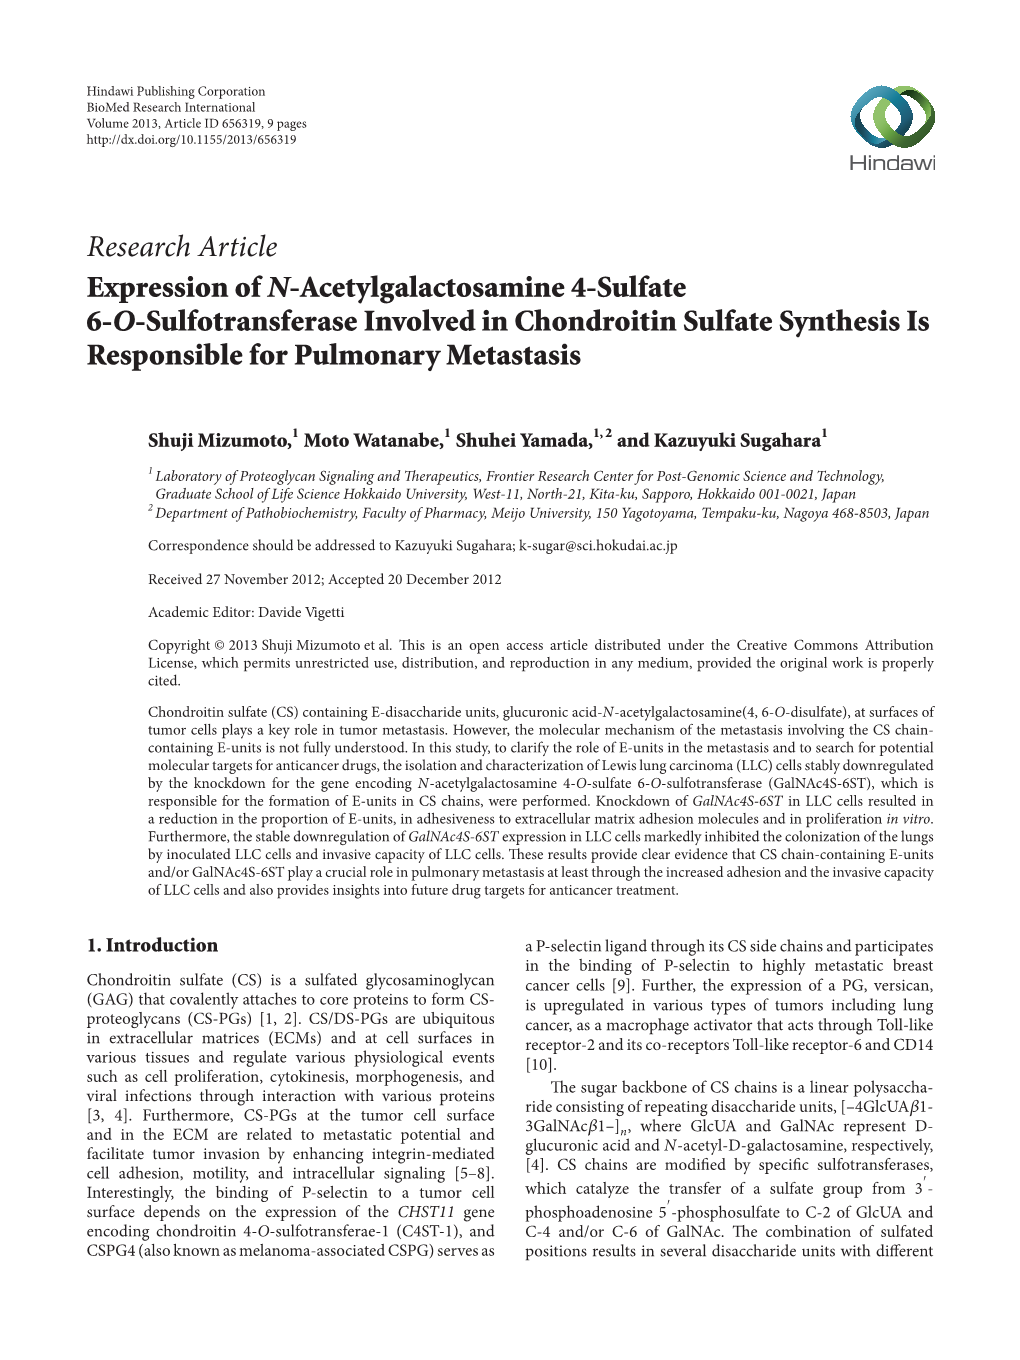 Research Article Expression of N-Acetylgalactosamine 4-Sulfate 6-O-Sulfotransferase Involved in Chondroitin Sulfate Synthesis Is Responsible for Pulmonary Metastasis